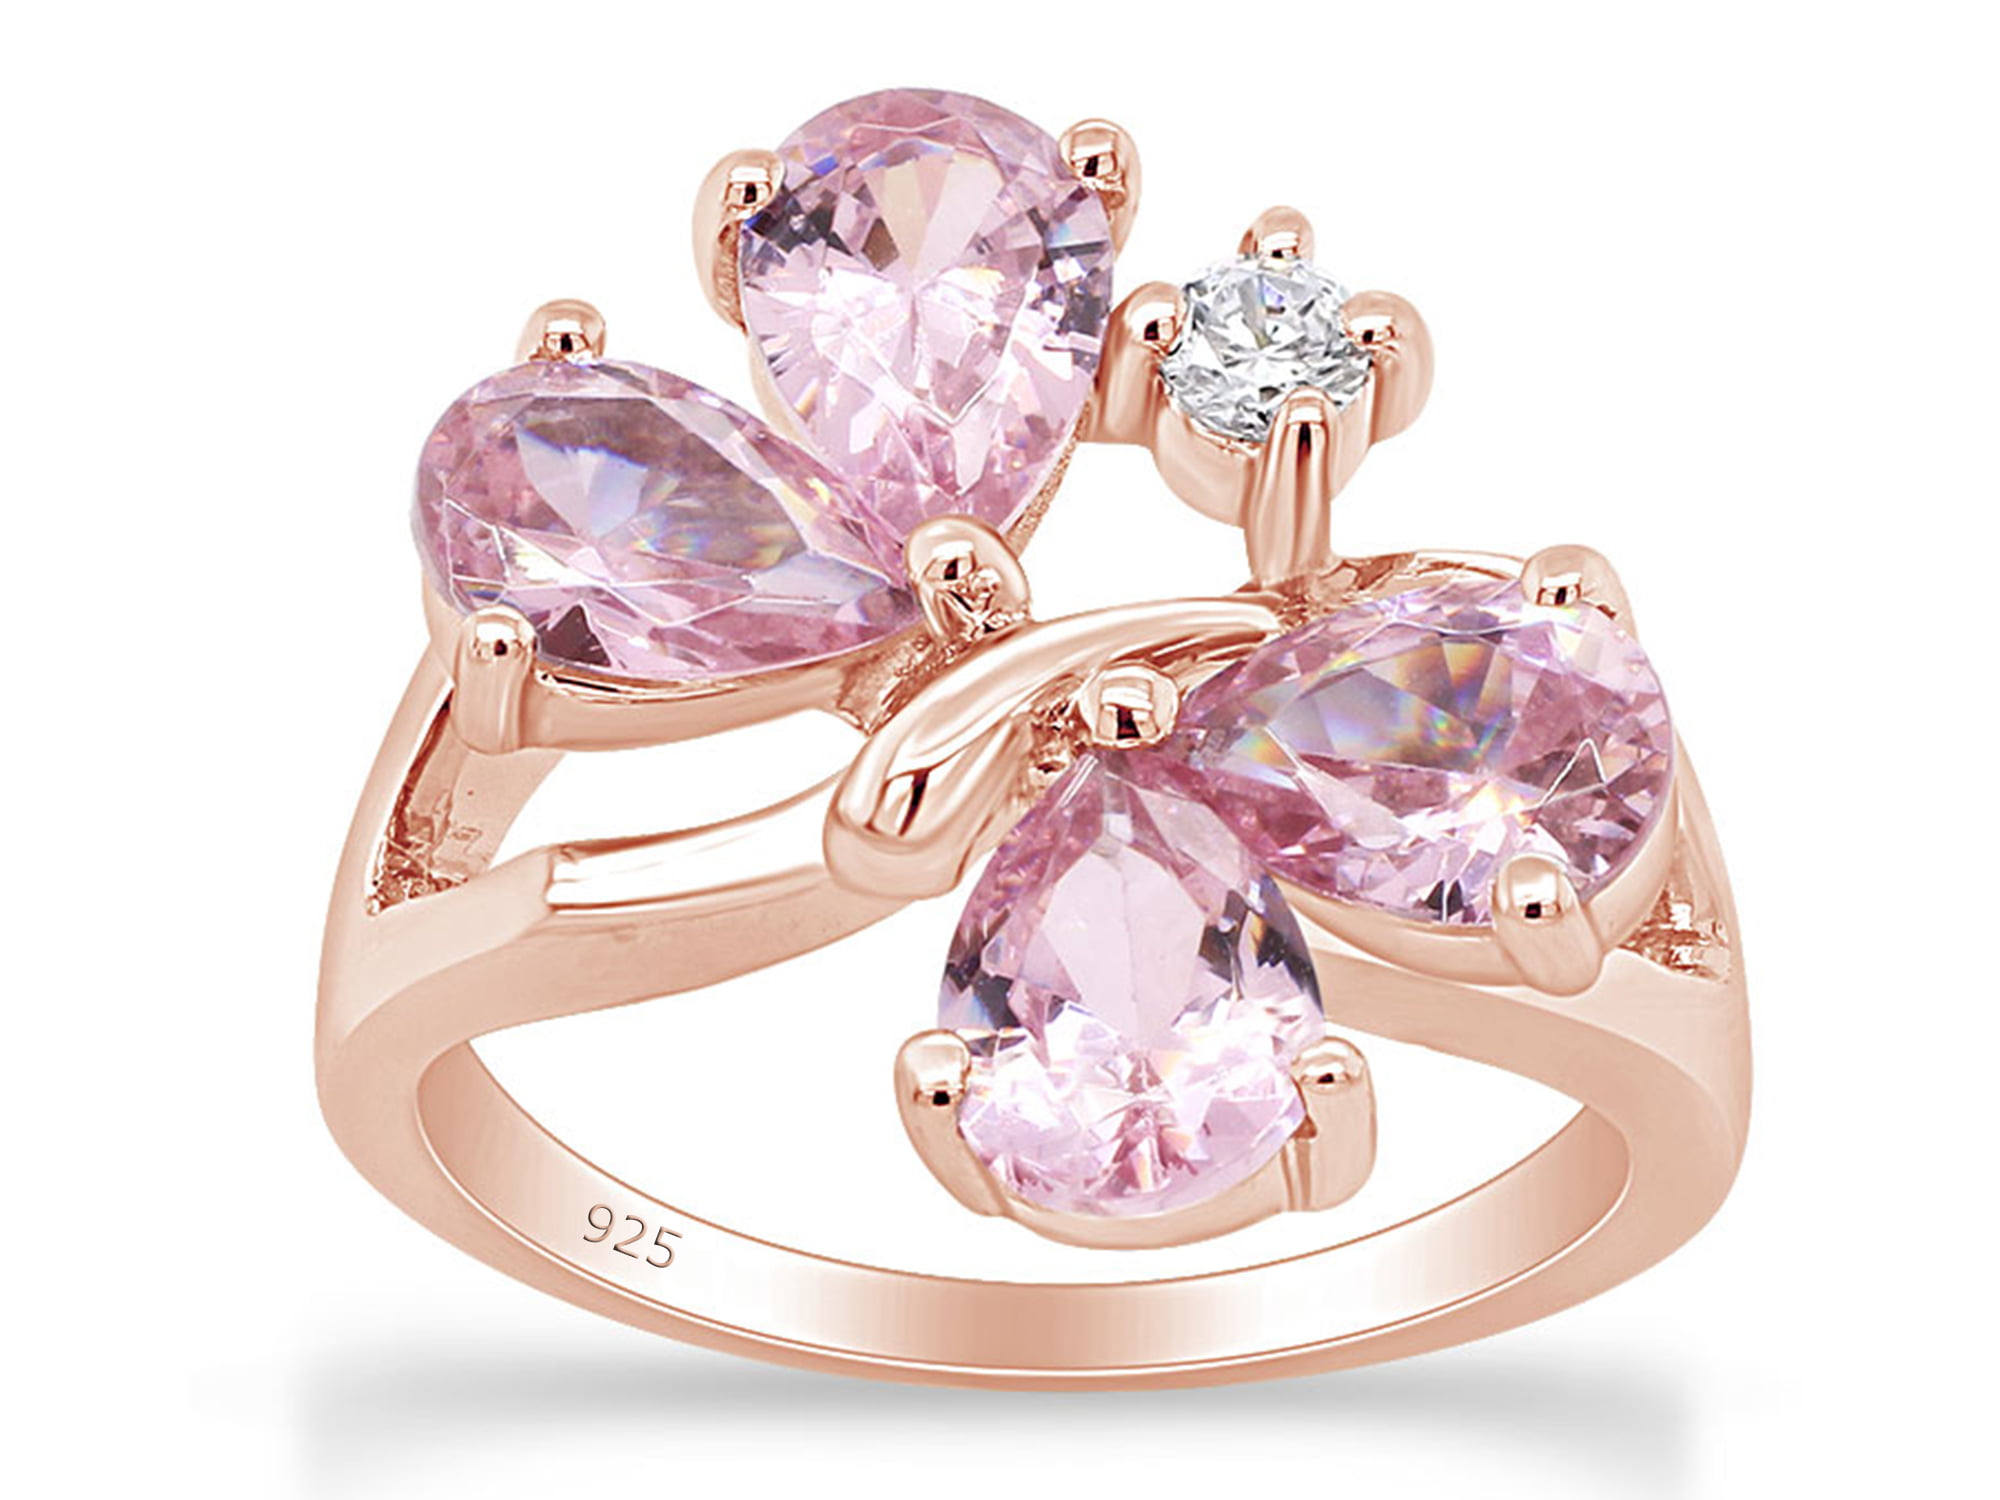 Wishrocks Round Cut White Cubic Zirconia Halo Engagement Ring in 14K Rose Gold Over Sterling Silver 